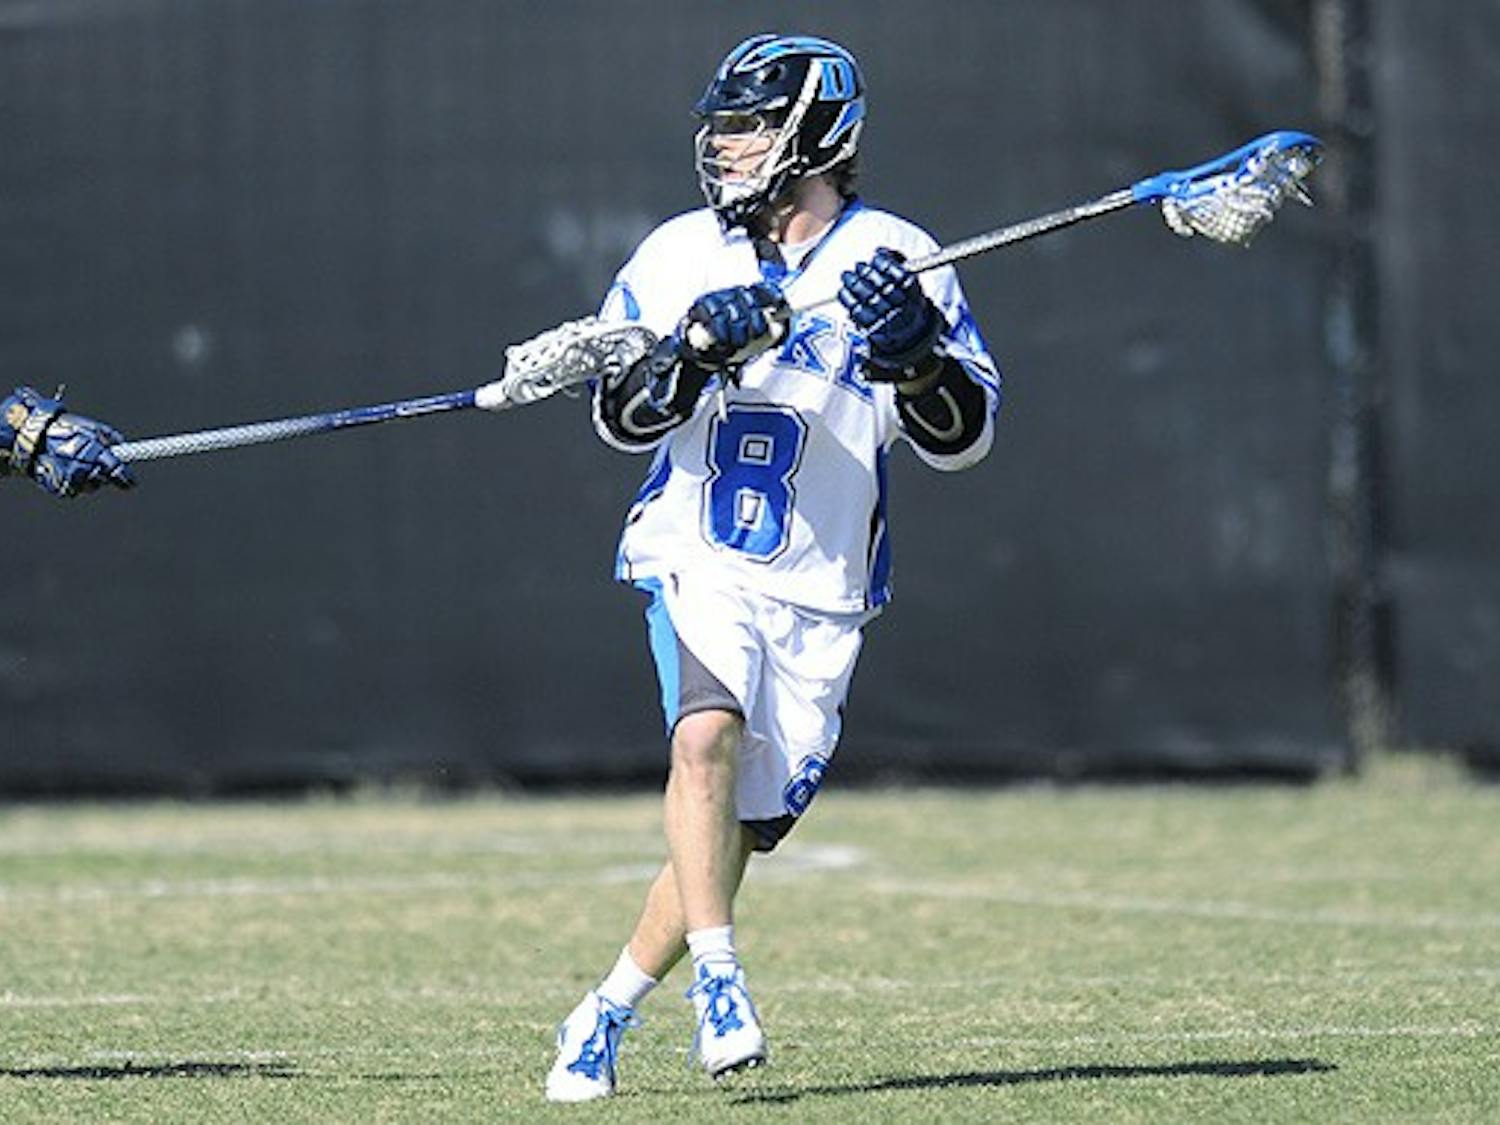 Senior Max Quinzani’s four goals were enough to seal Duke’s win over No. 9 Loyola Friday.